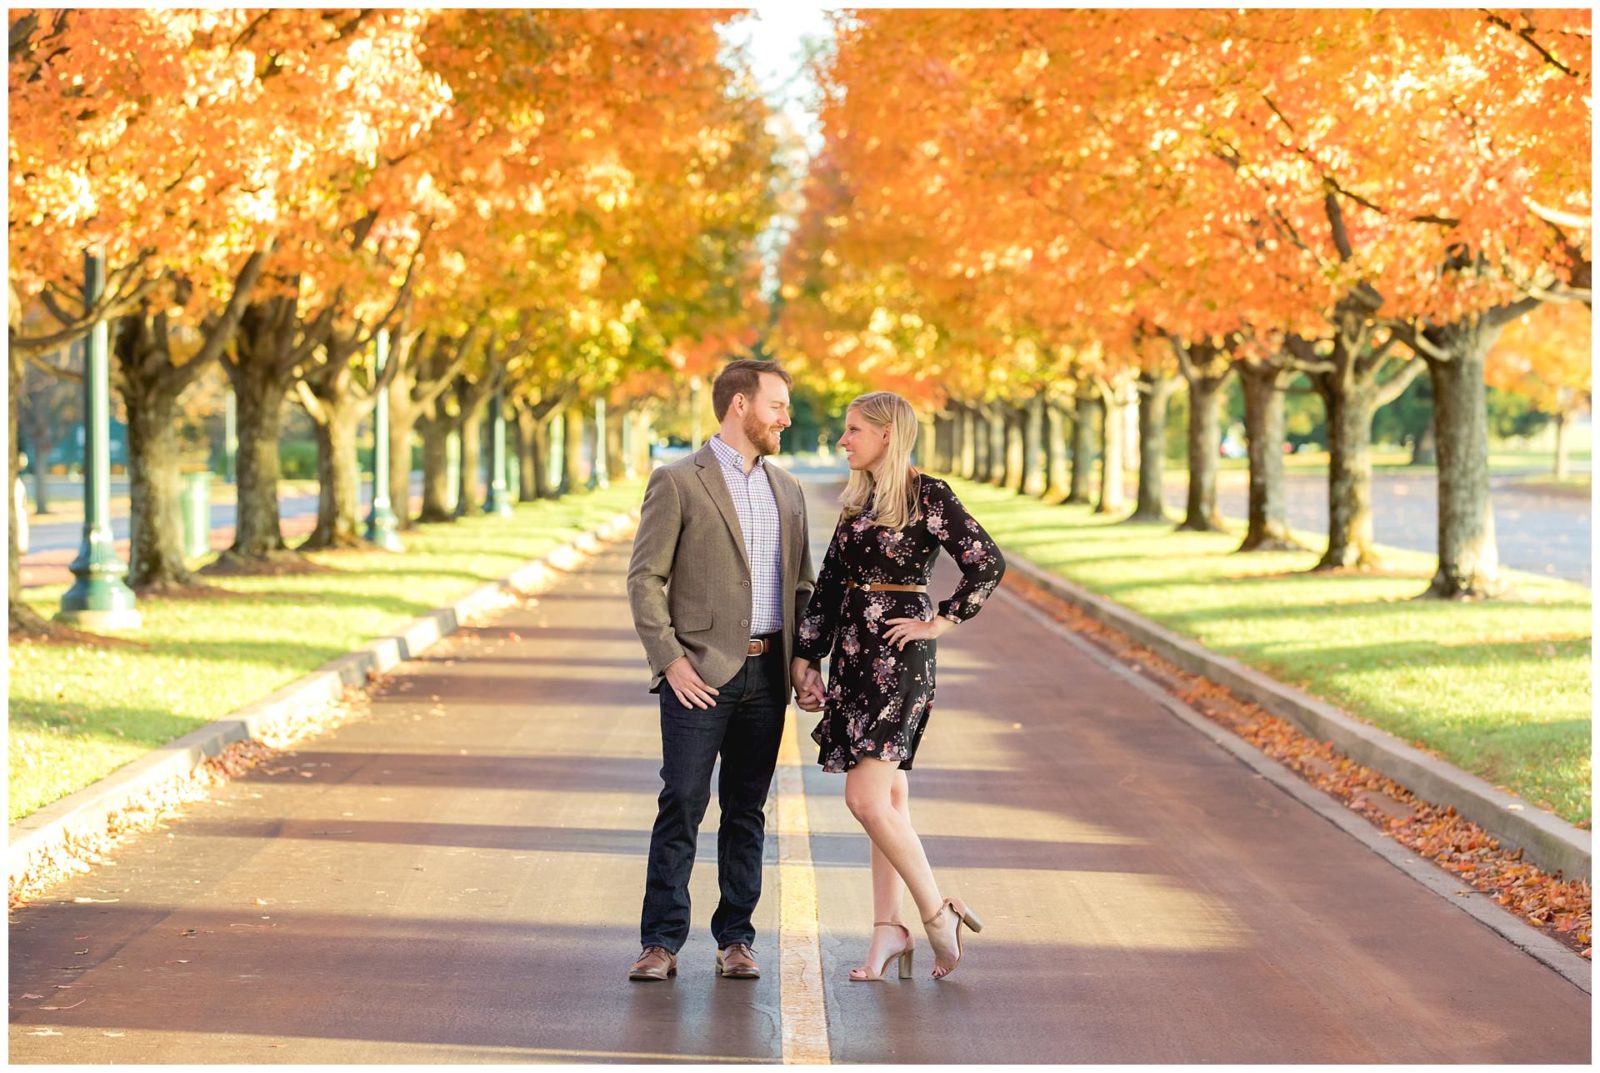 Fall Engagement Session with the row of trees at Keeneland Racetrack in Lexington, Kentucky.